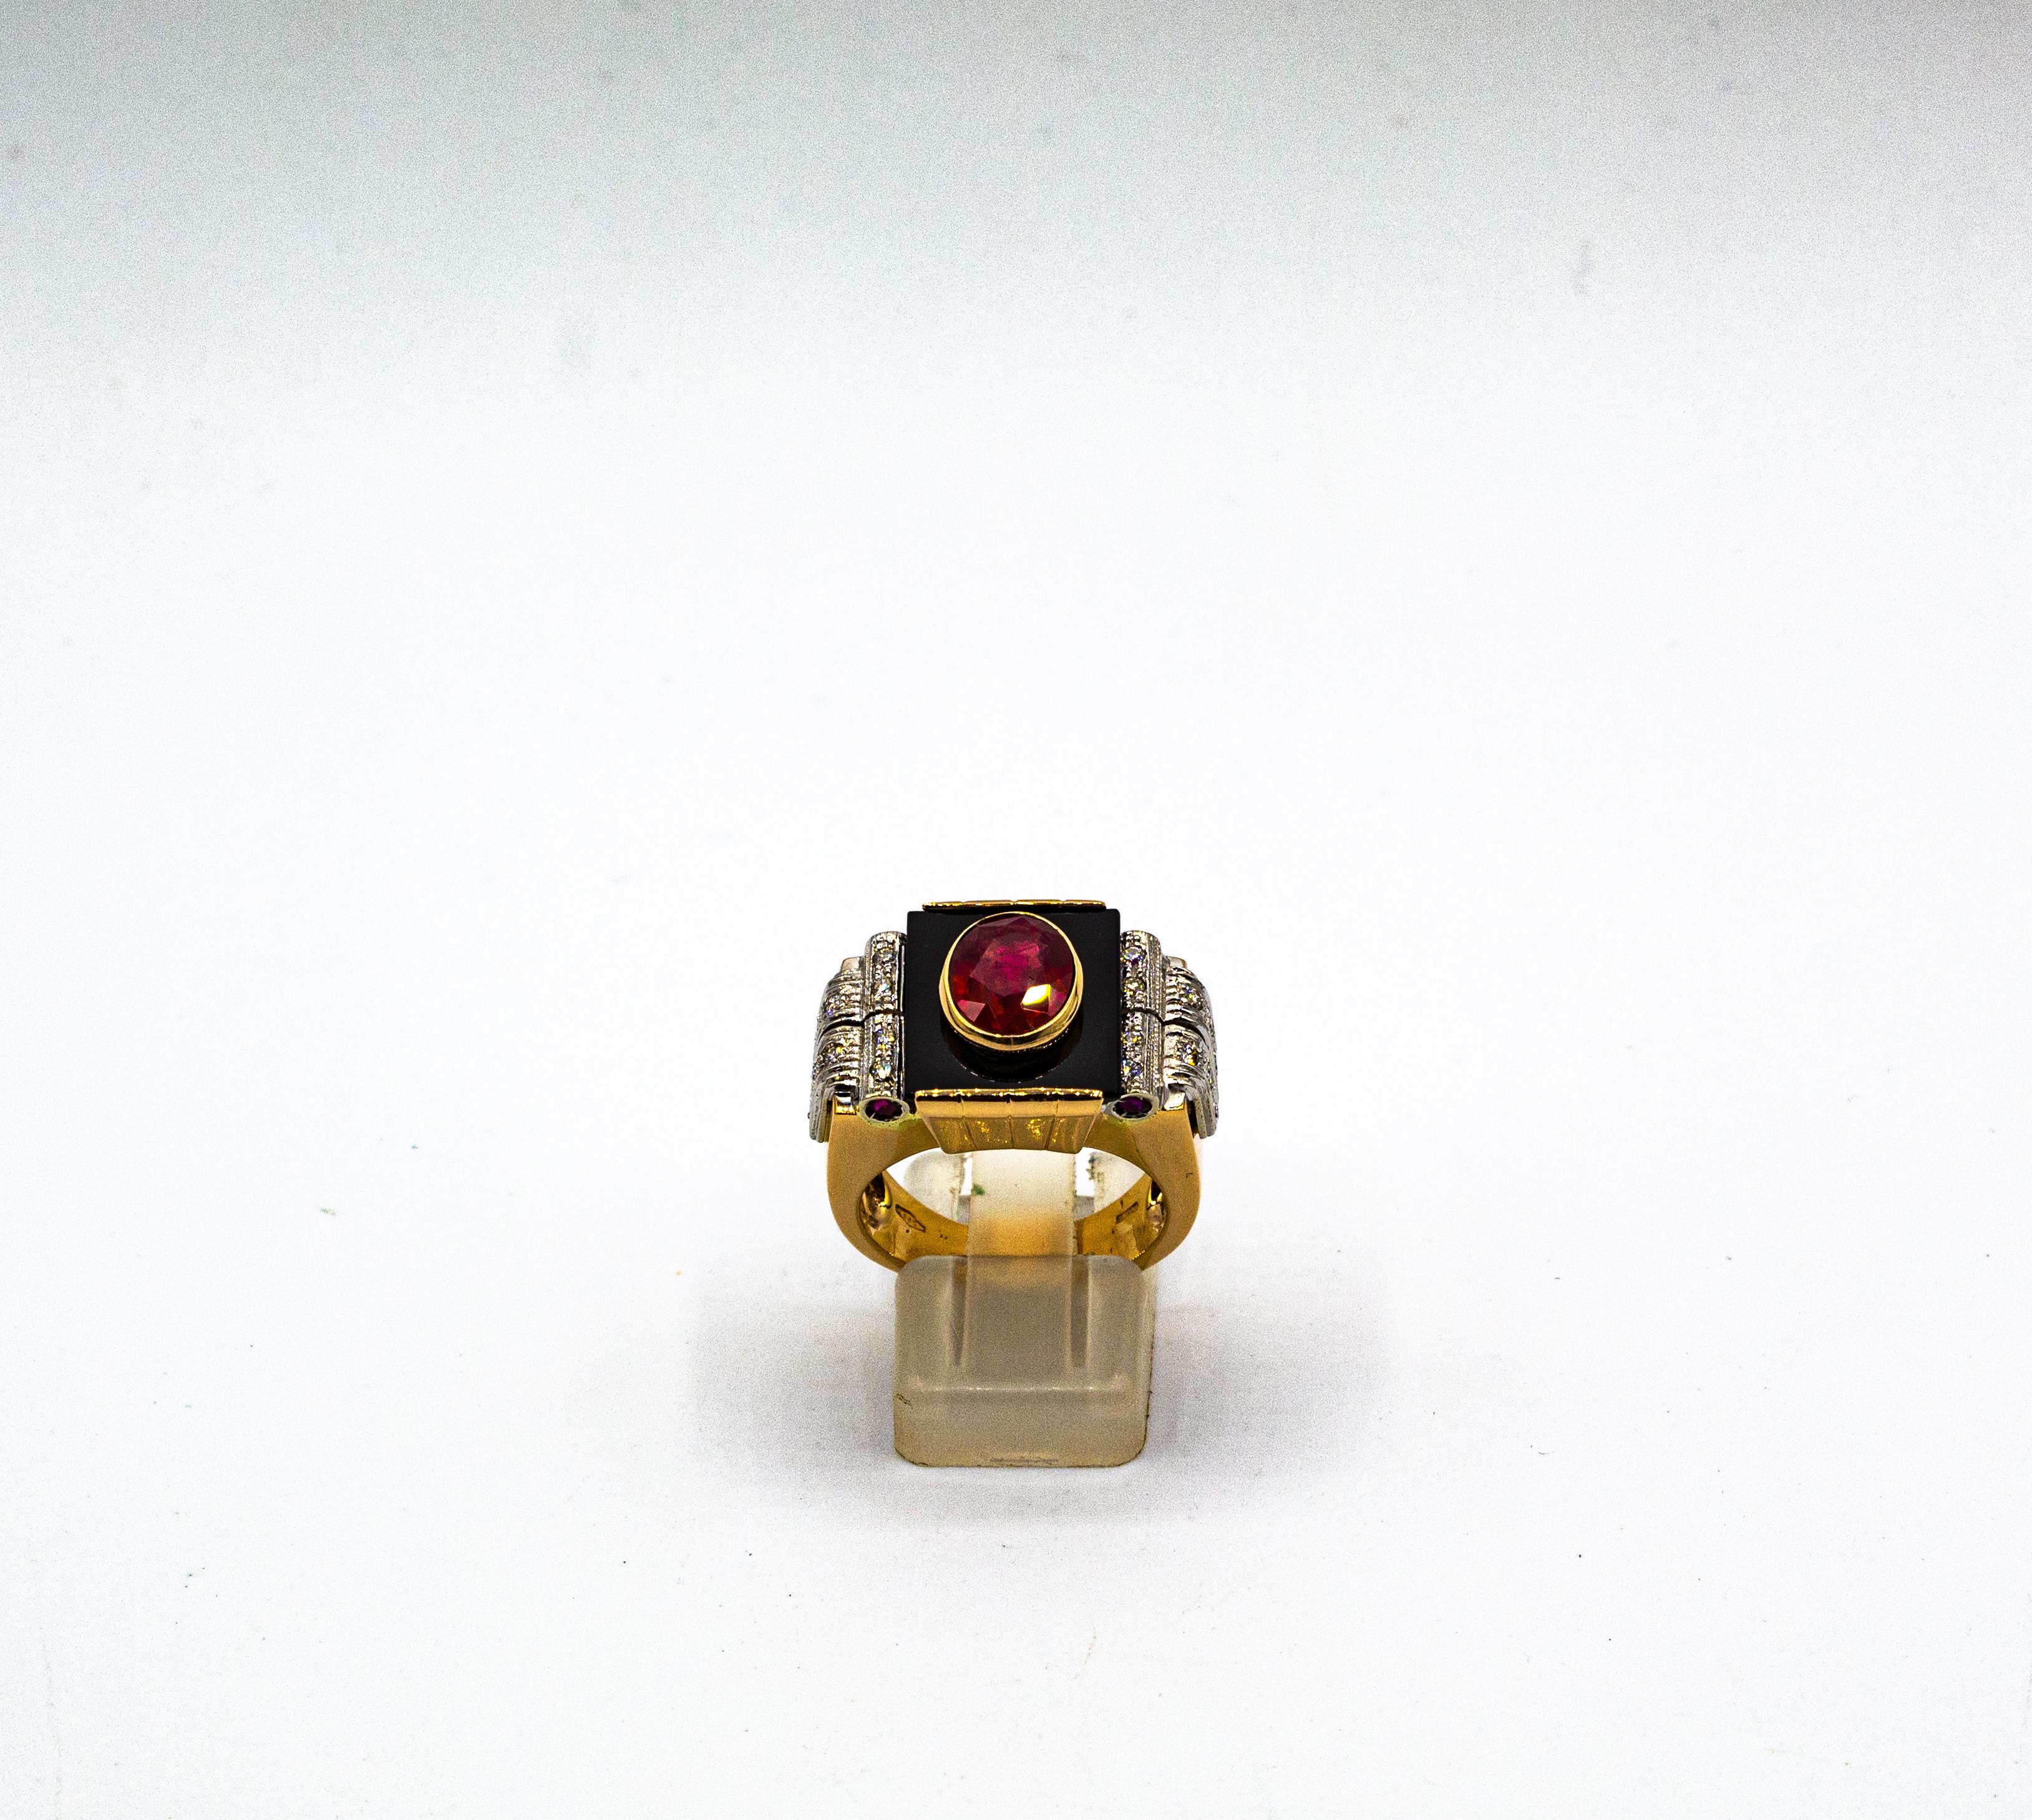 This Ring is made of 14K Yellow Gold and White Gold.
This Ring has 0.30 Carats of White Modern Round Cut Diamonds.
This Ring has a 2.30 Carats Natural Treated Oval Cut Ruby.
This Ring has also 0.20 Carats of Rubies.
This Ring has also Onyx.

Size